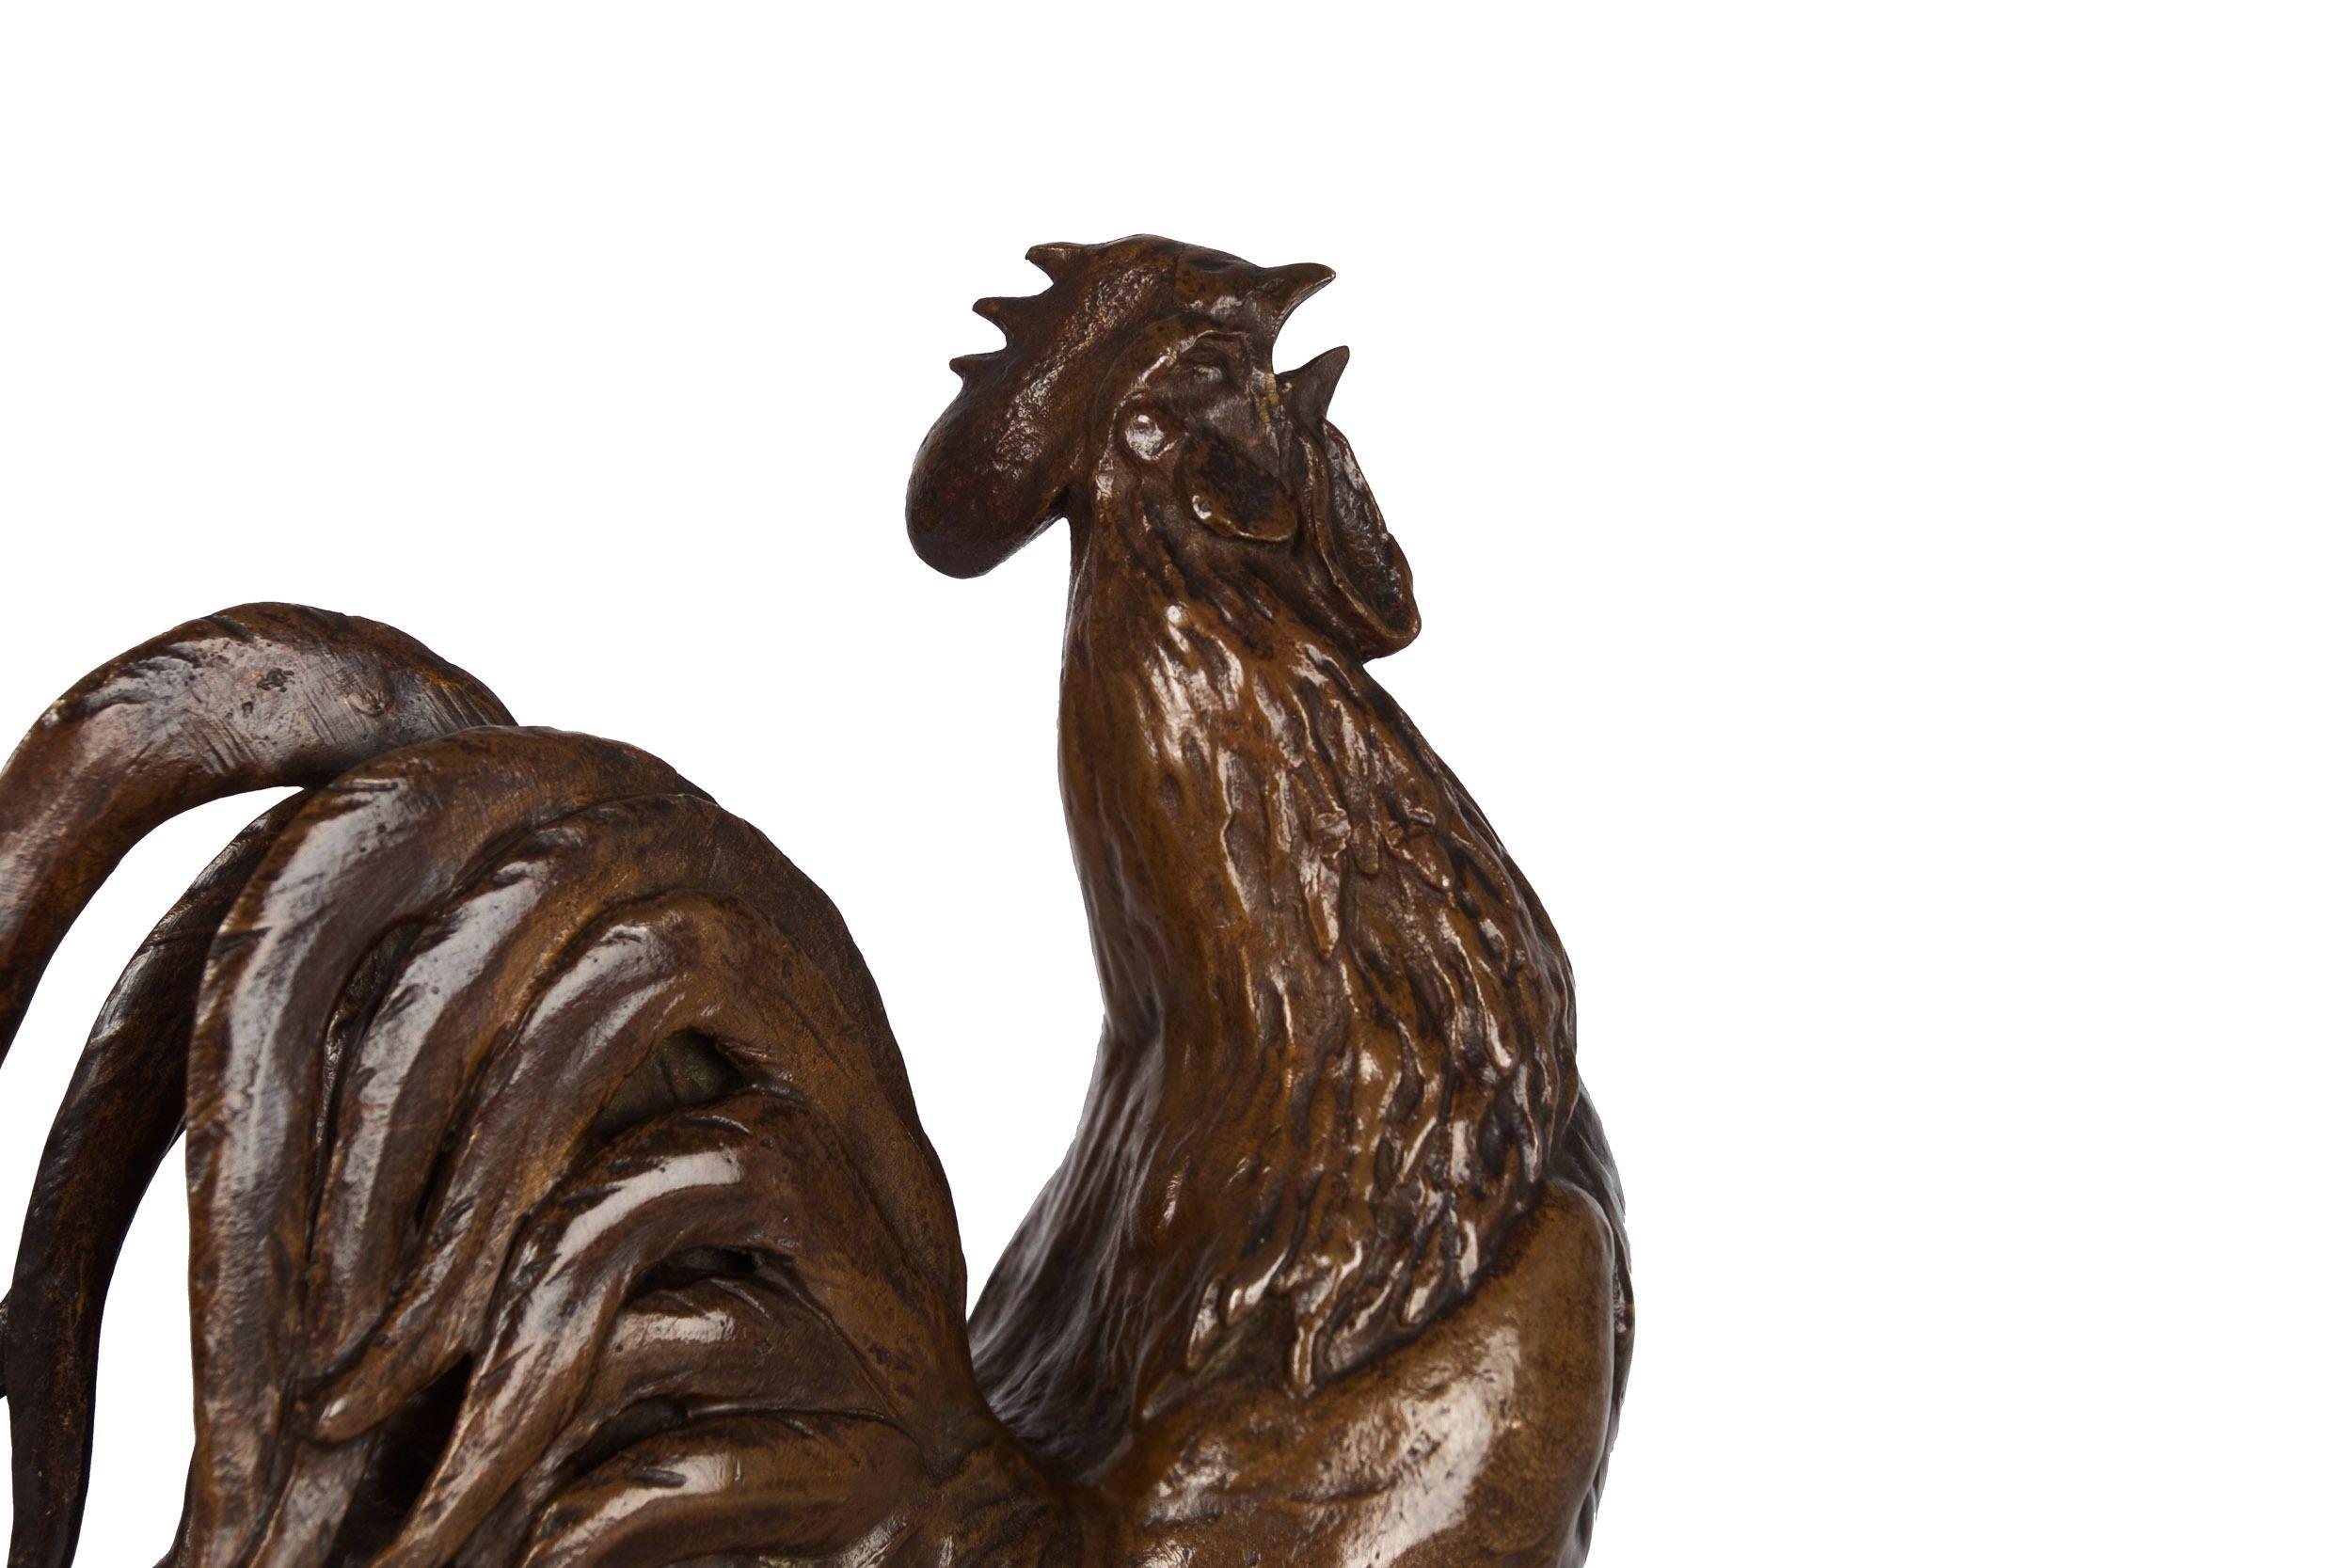 20th Century French Antique Bronze Sculpture of Rooster by Auguste Cain & Susse Freres